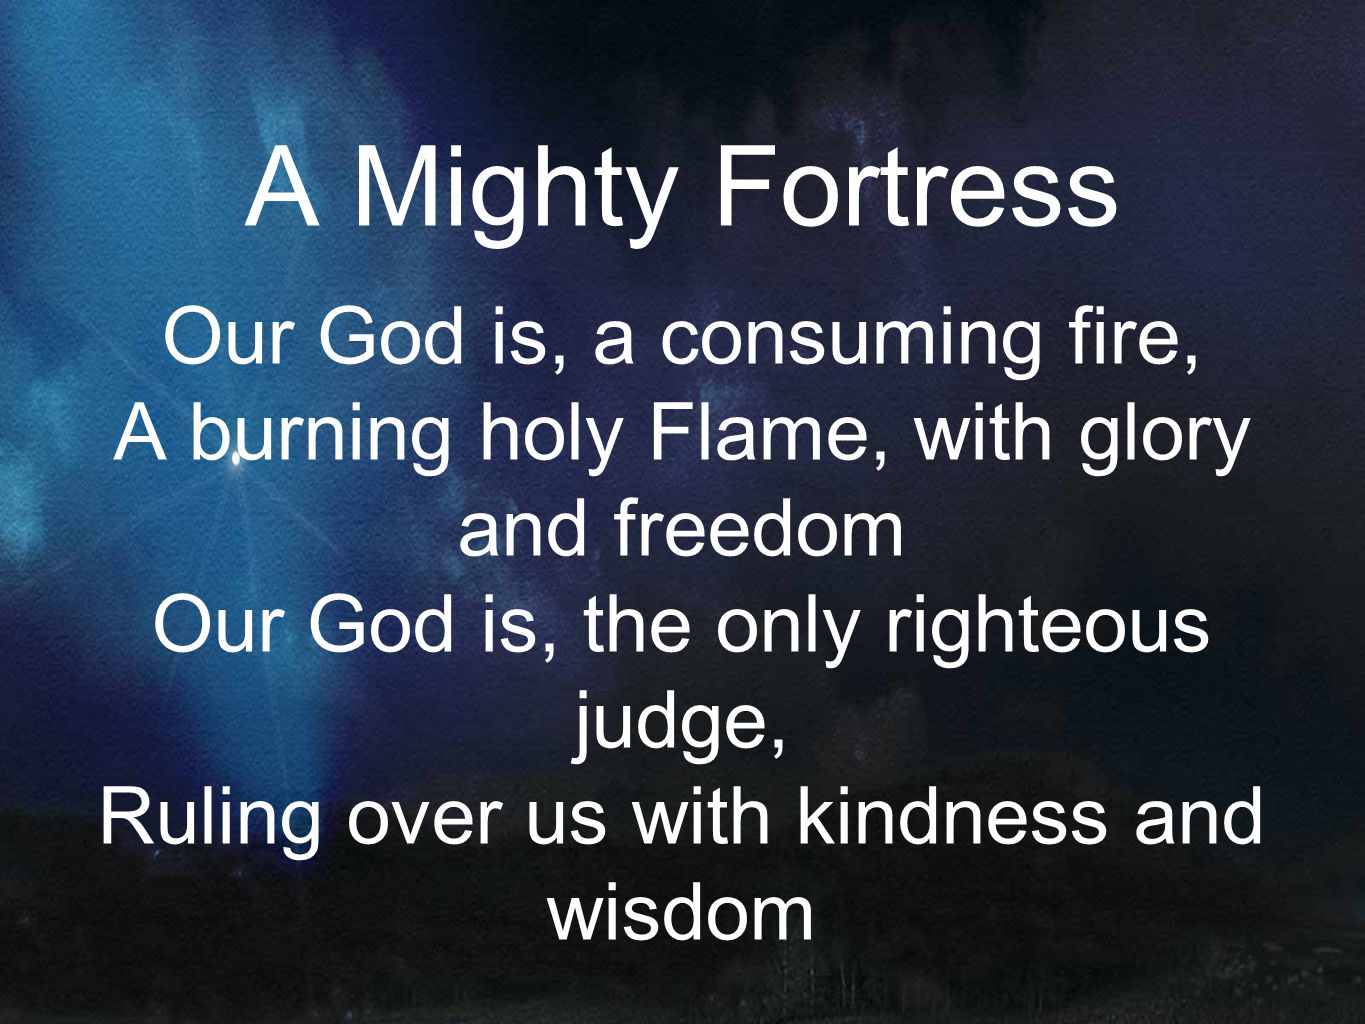 A Mighty Fortress Our God is, a consuming fire, A burning holy Flame, with glory and freedom Our God is, the only righteous judge, Ruling over us with kindness and wisdom